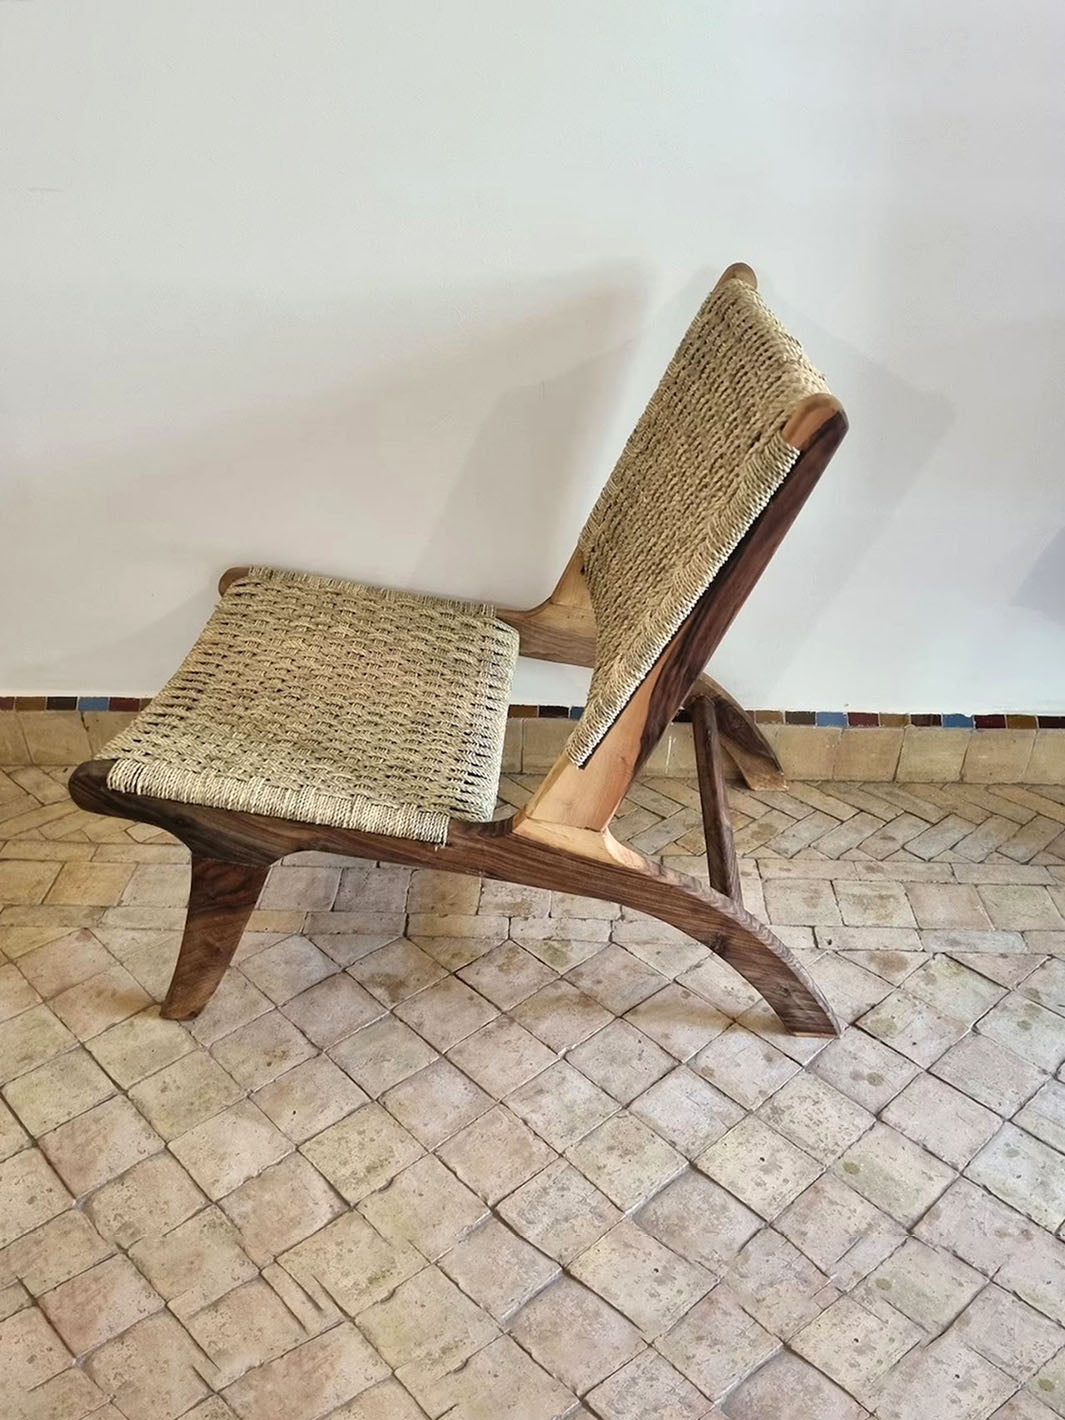 Handcrafted Artisanal Moroccan Ropes Wooden Armchair Libitii Chairs LIB-0082-4